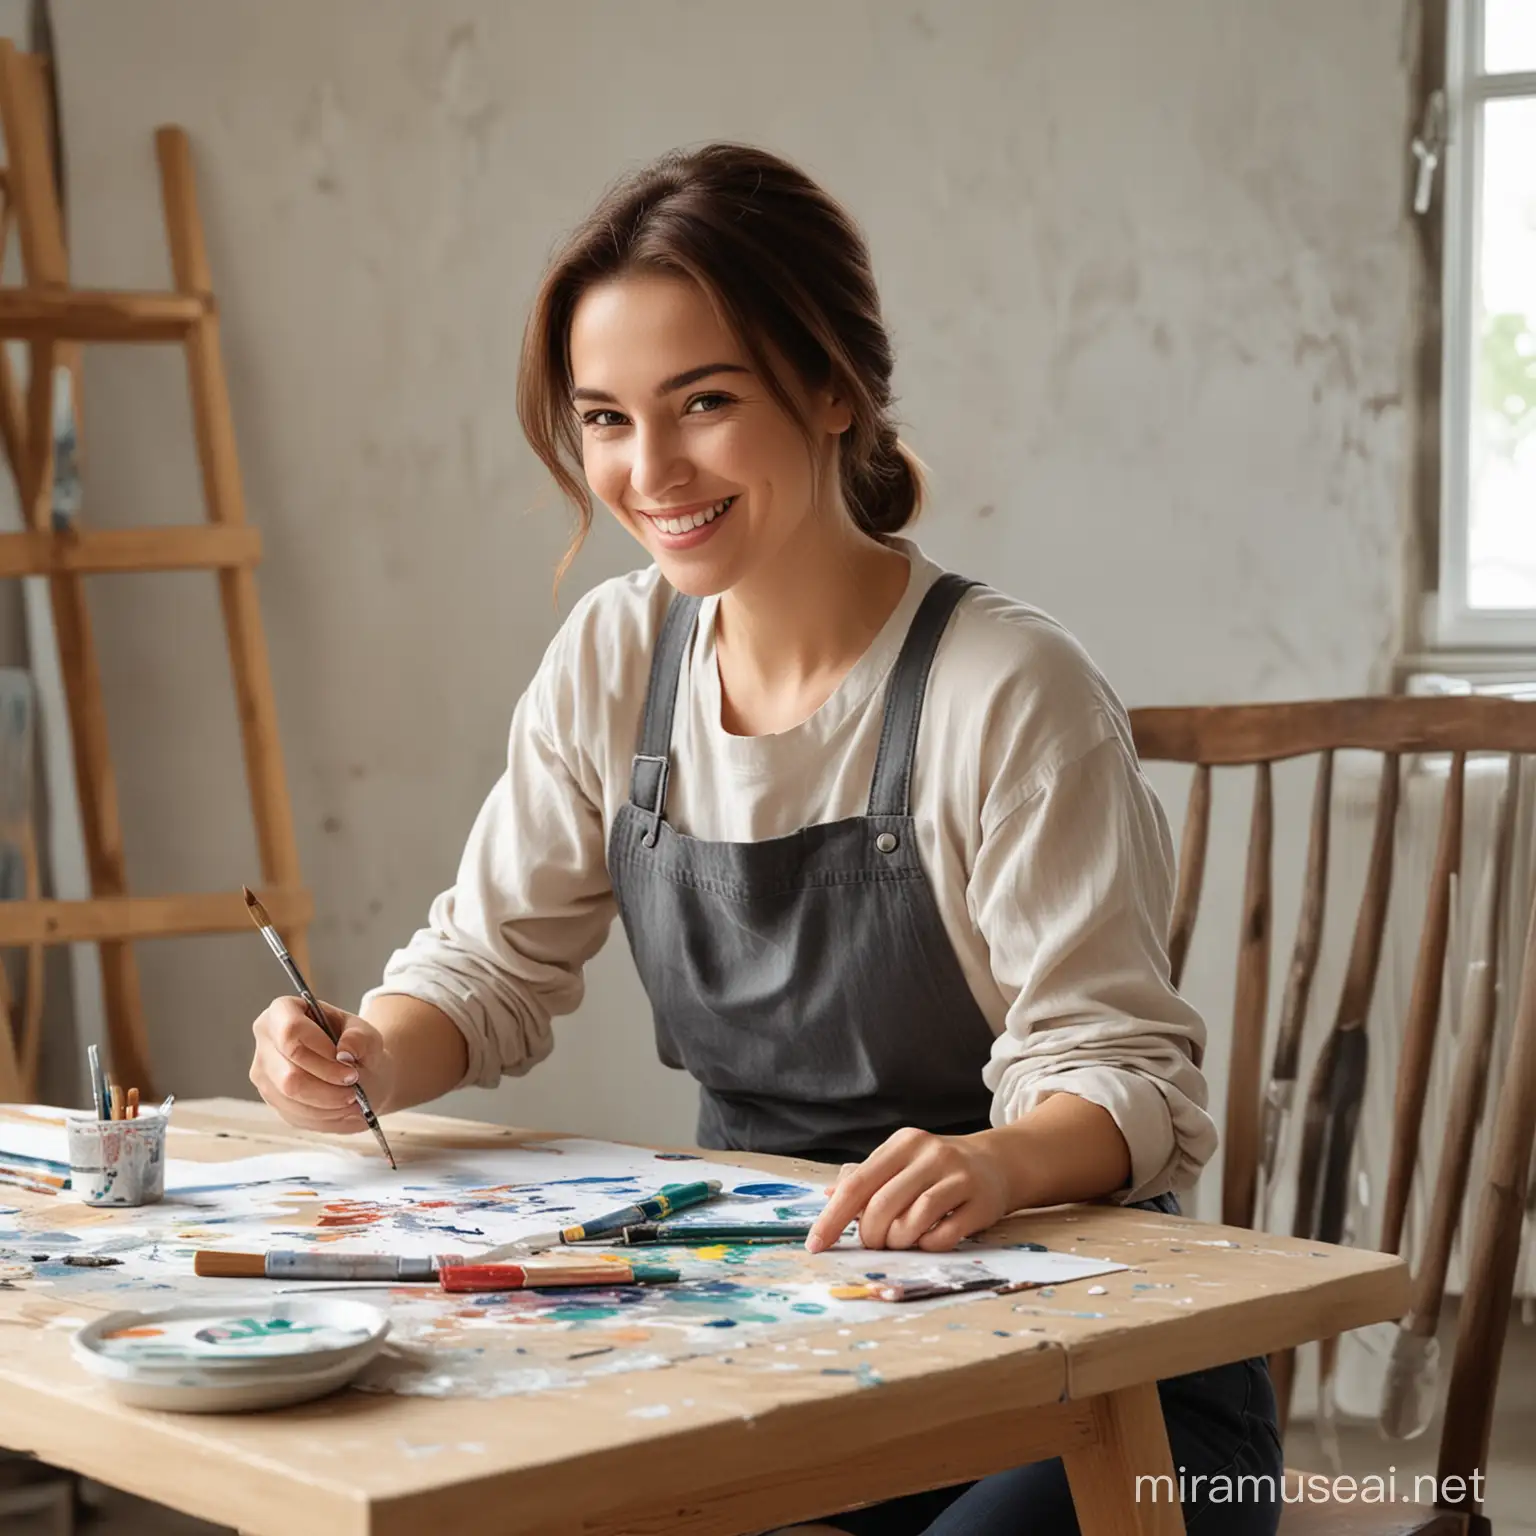 Smiling Woman Artist Painting at Table